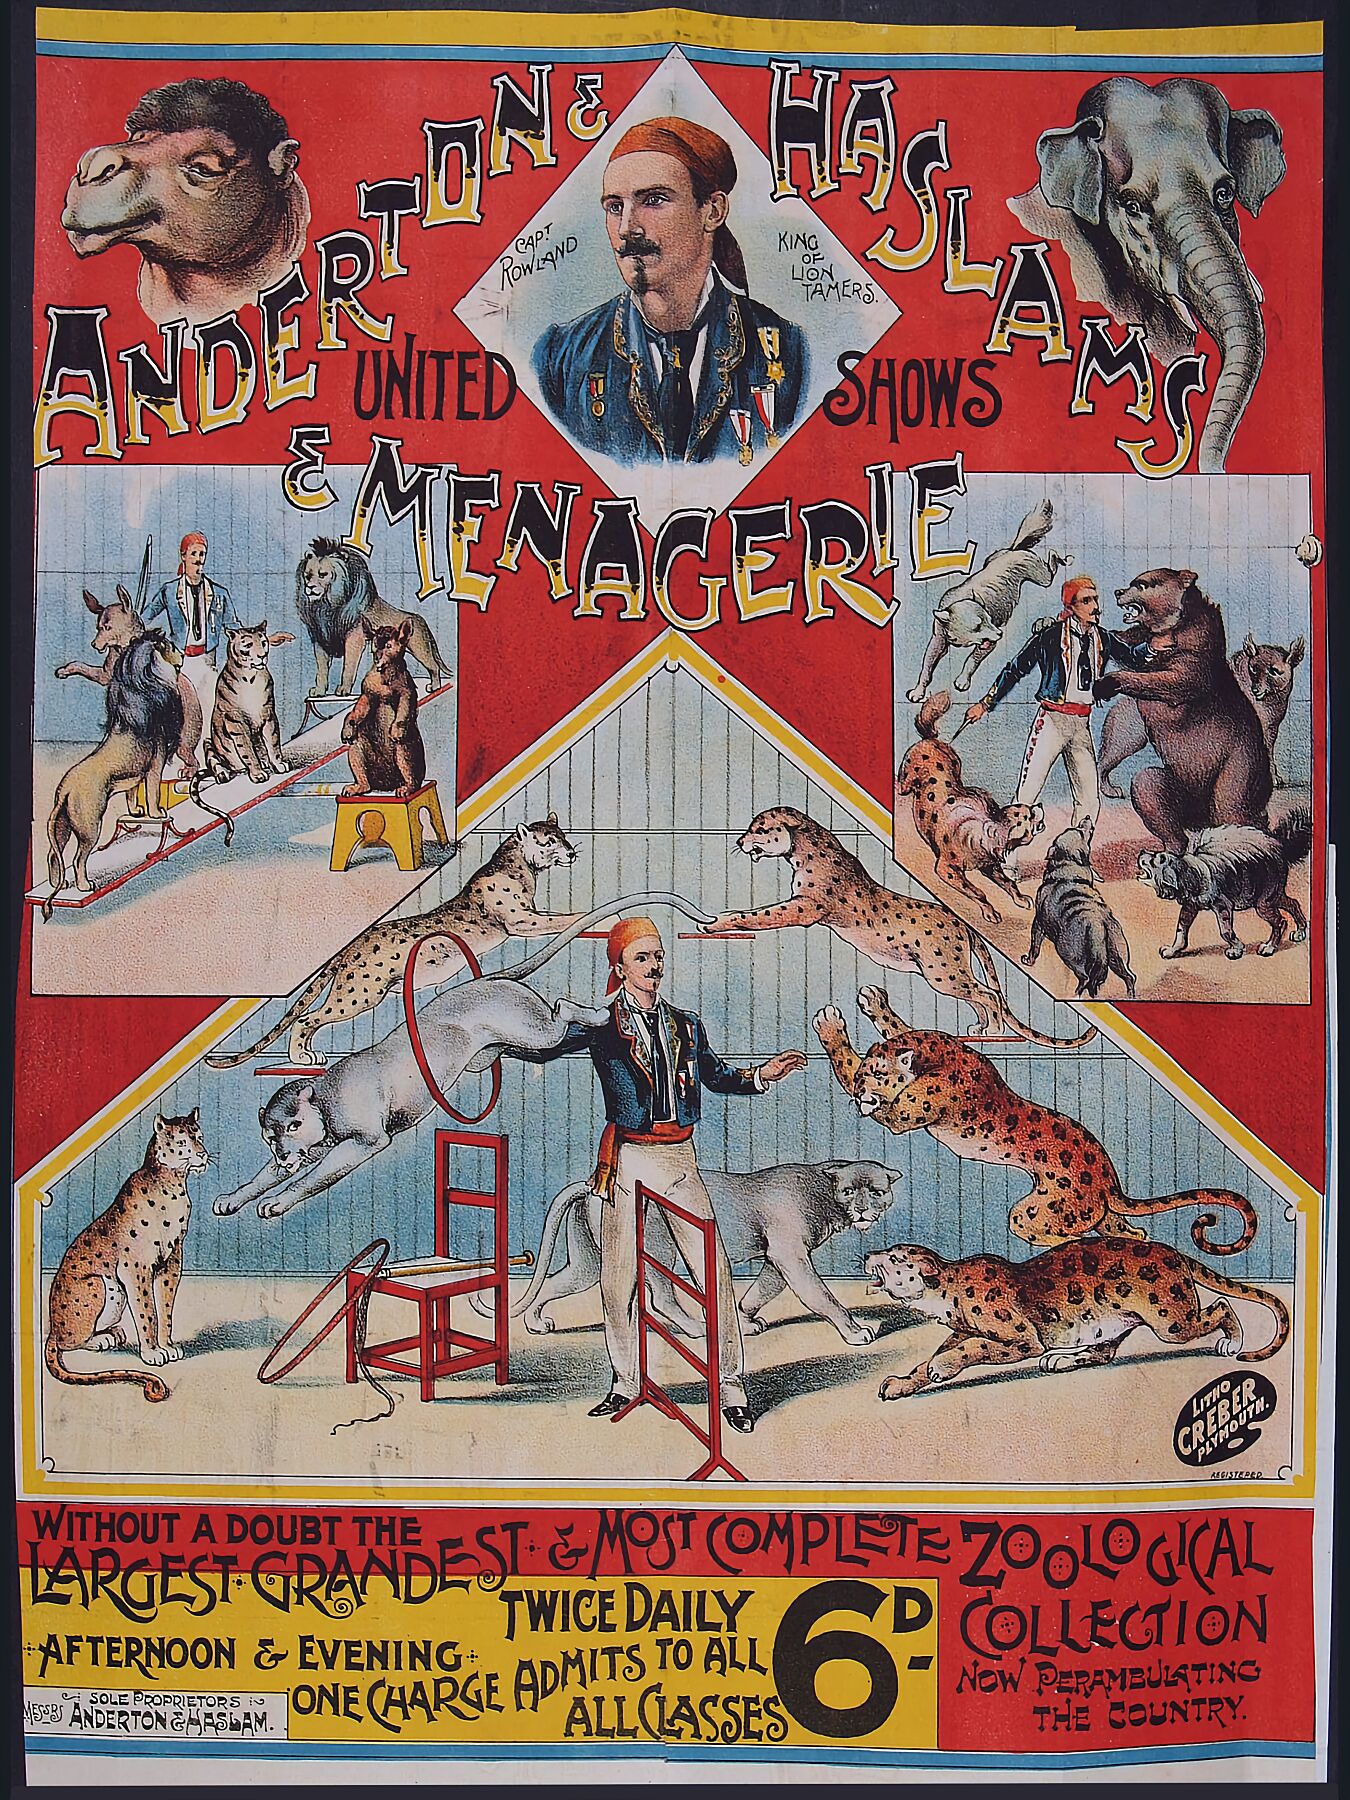 Advertisement for Anderton and Haslams United Shows and Menagerie - 1898